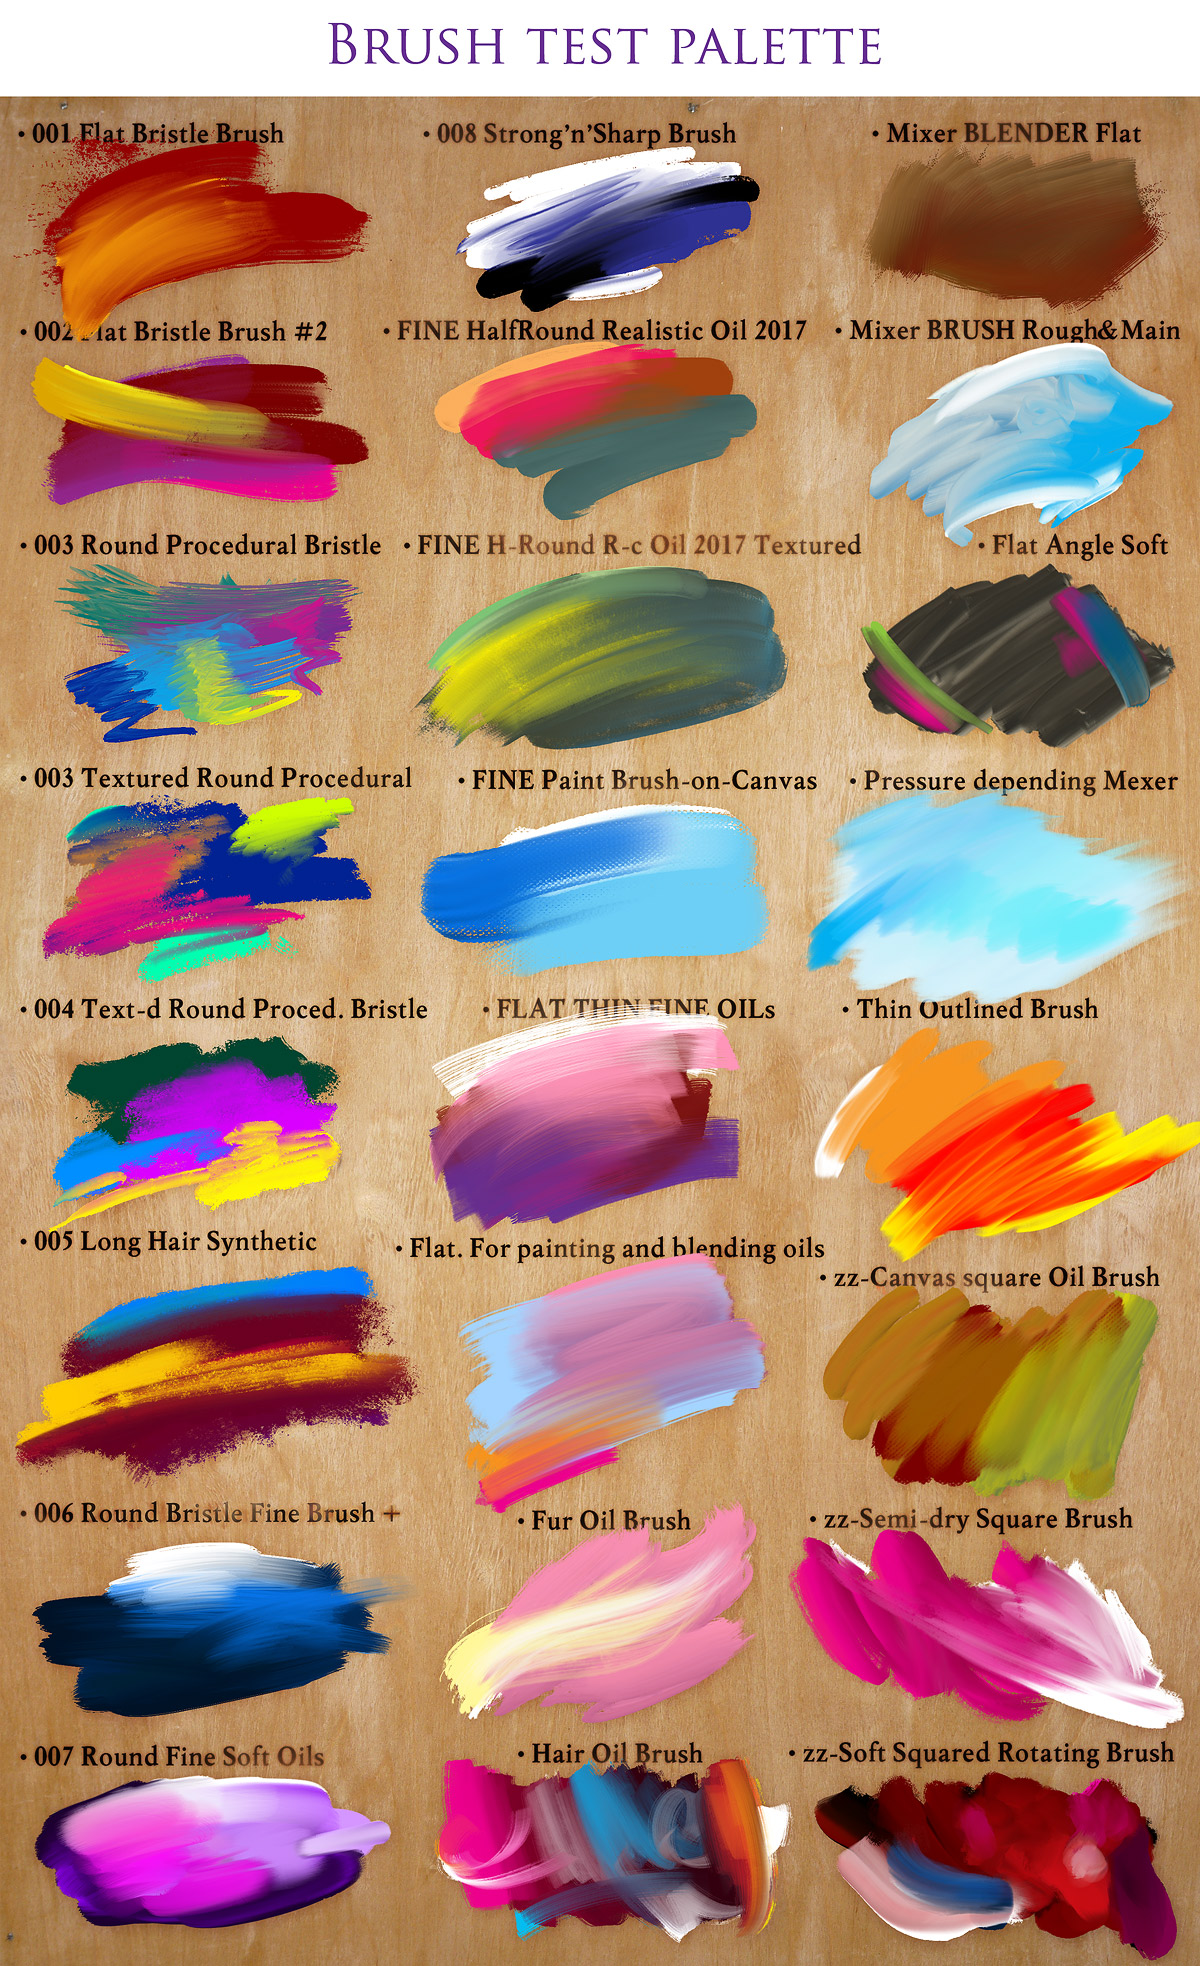 The Perfect Oil Bundle With 24 Photoshop Mixer Brushes - Brush Test Palette